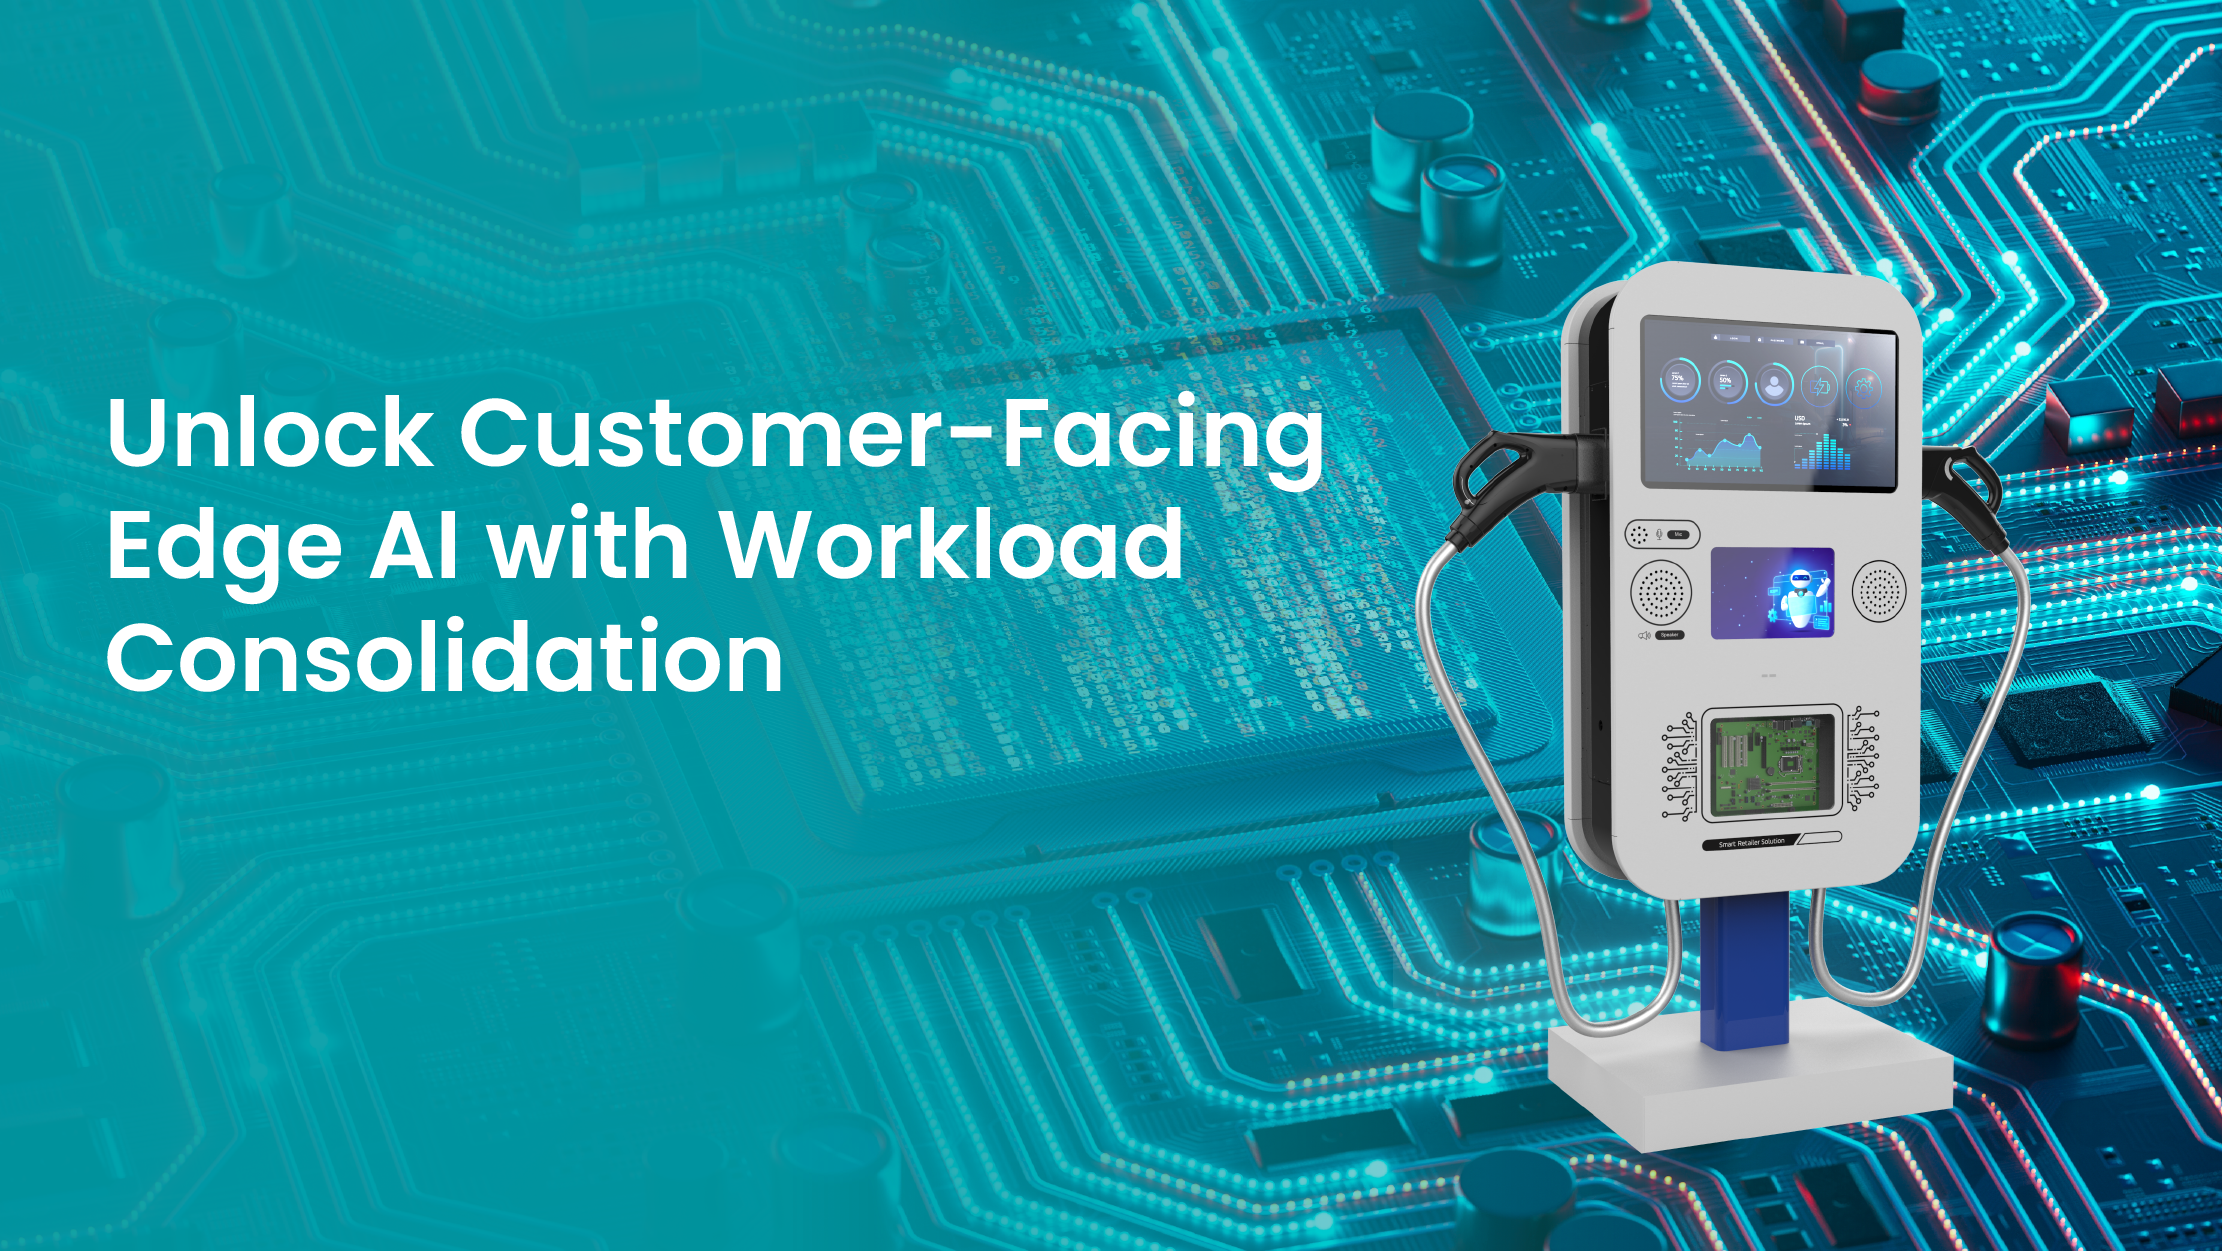 Unlock Customer-Facing Edge AI with Workload Consolidation